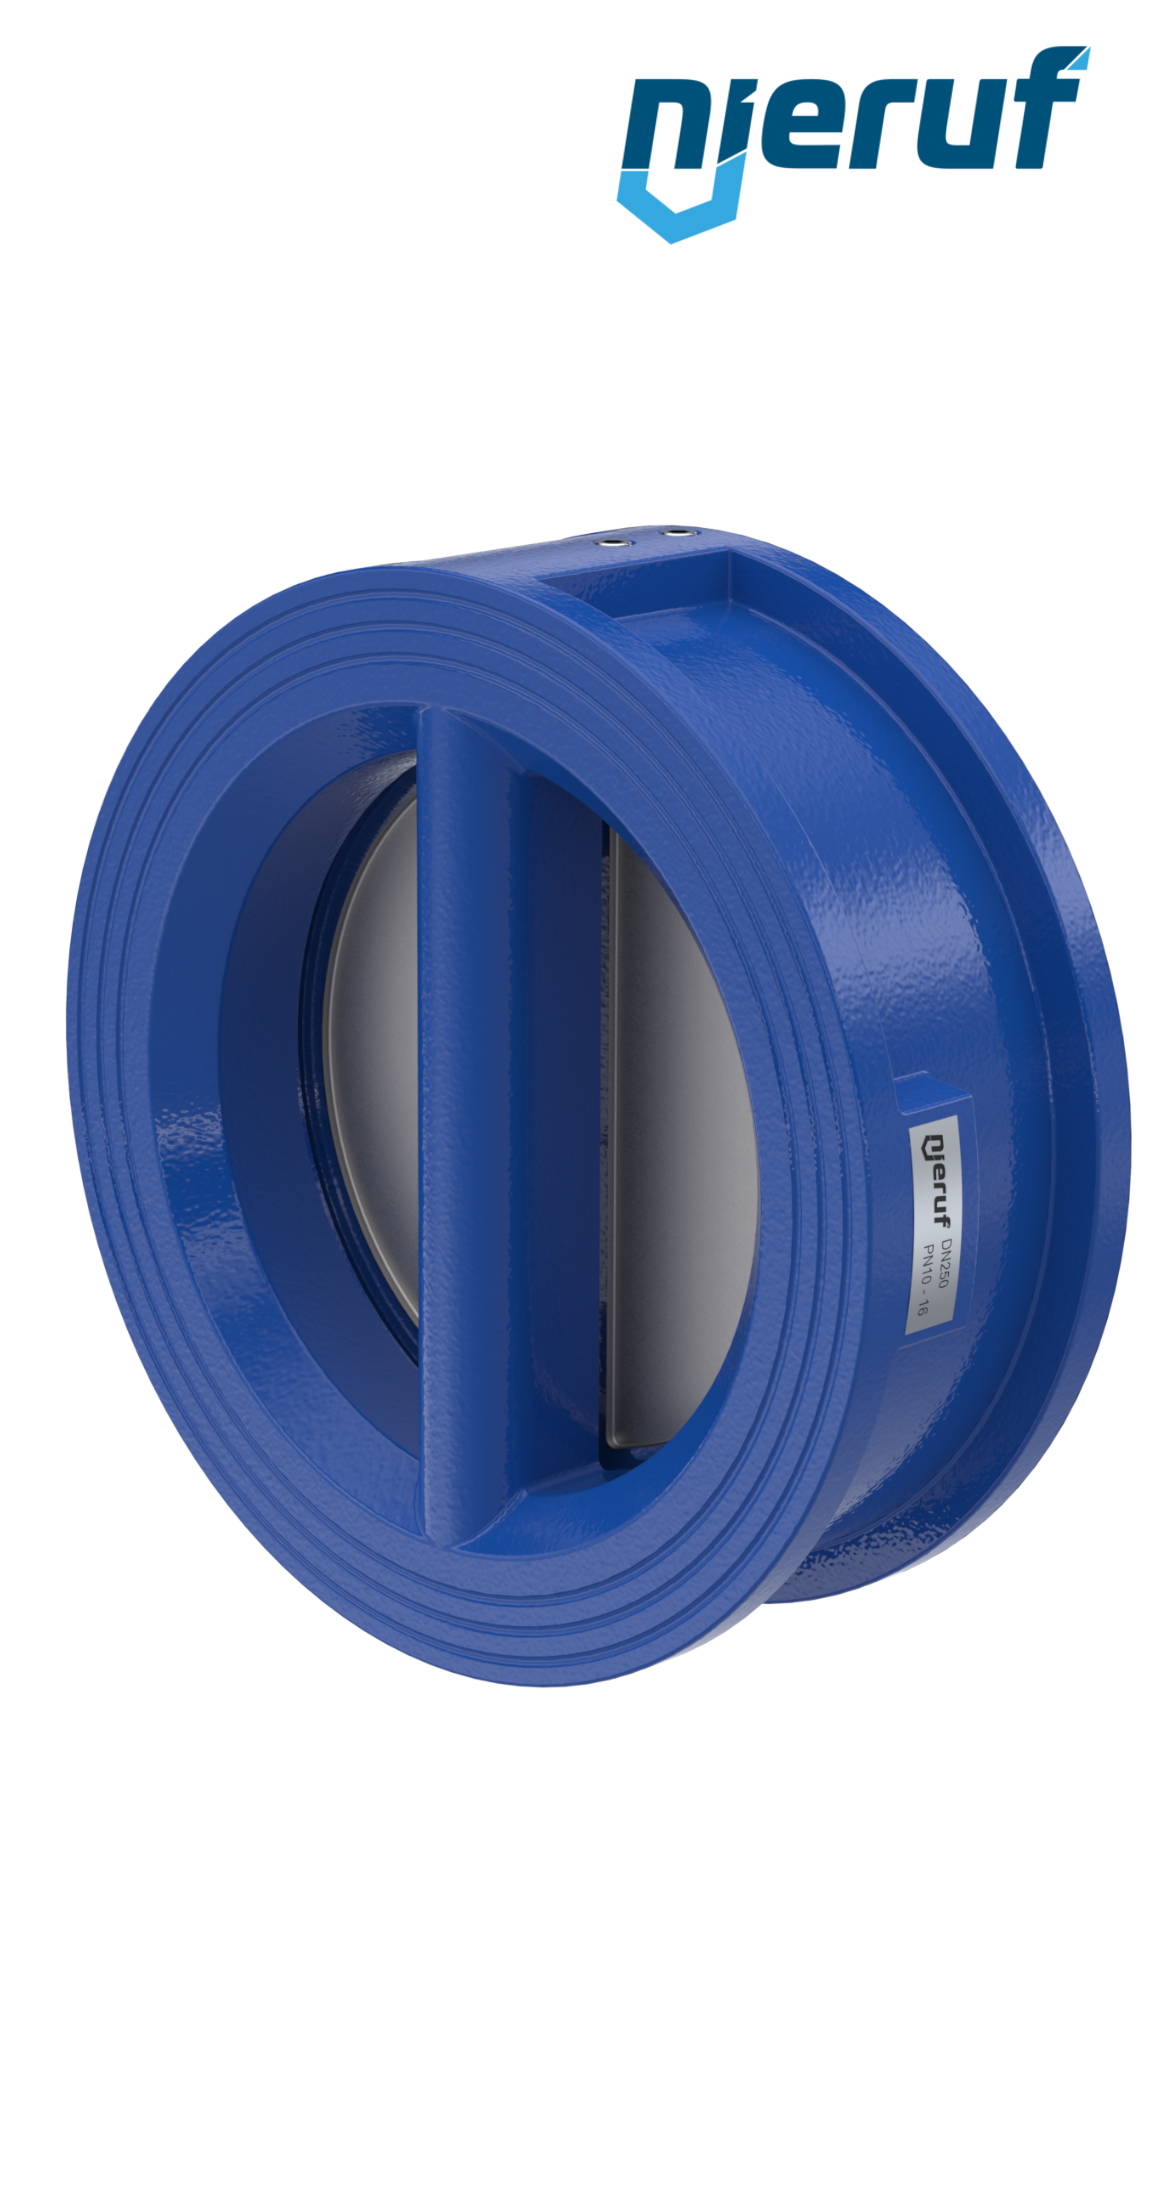 dual plate check valve DN250 DR01 GGG40 epoxyd plated blue 180µm NBR